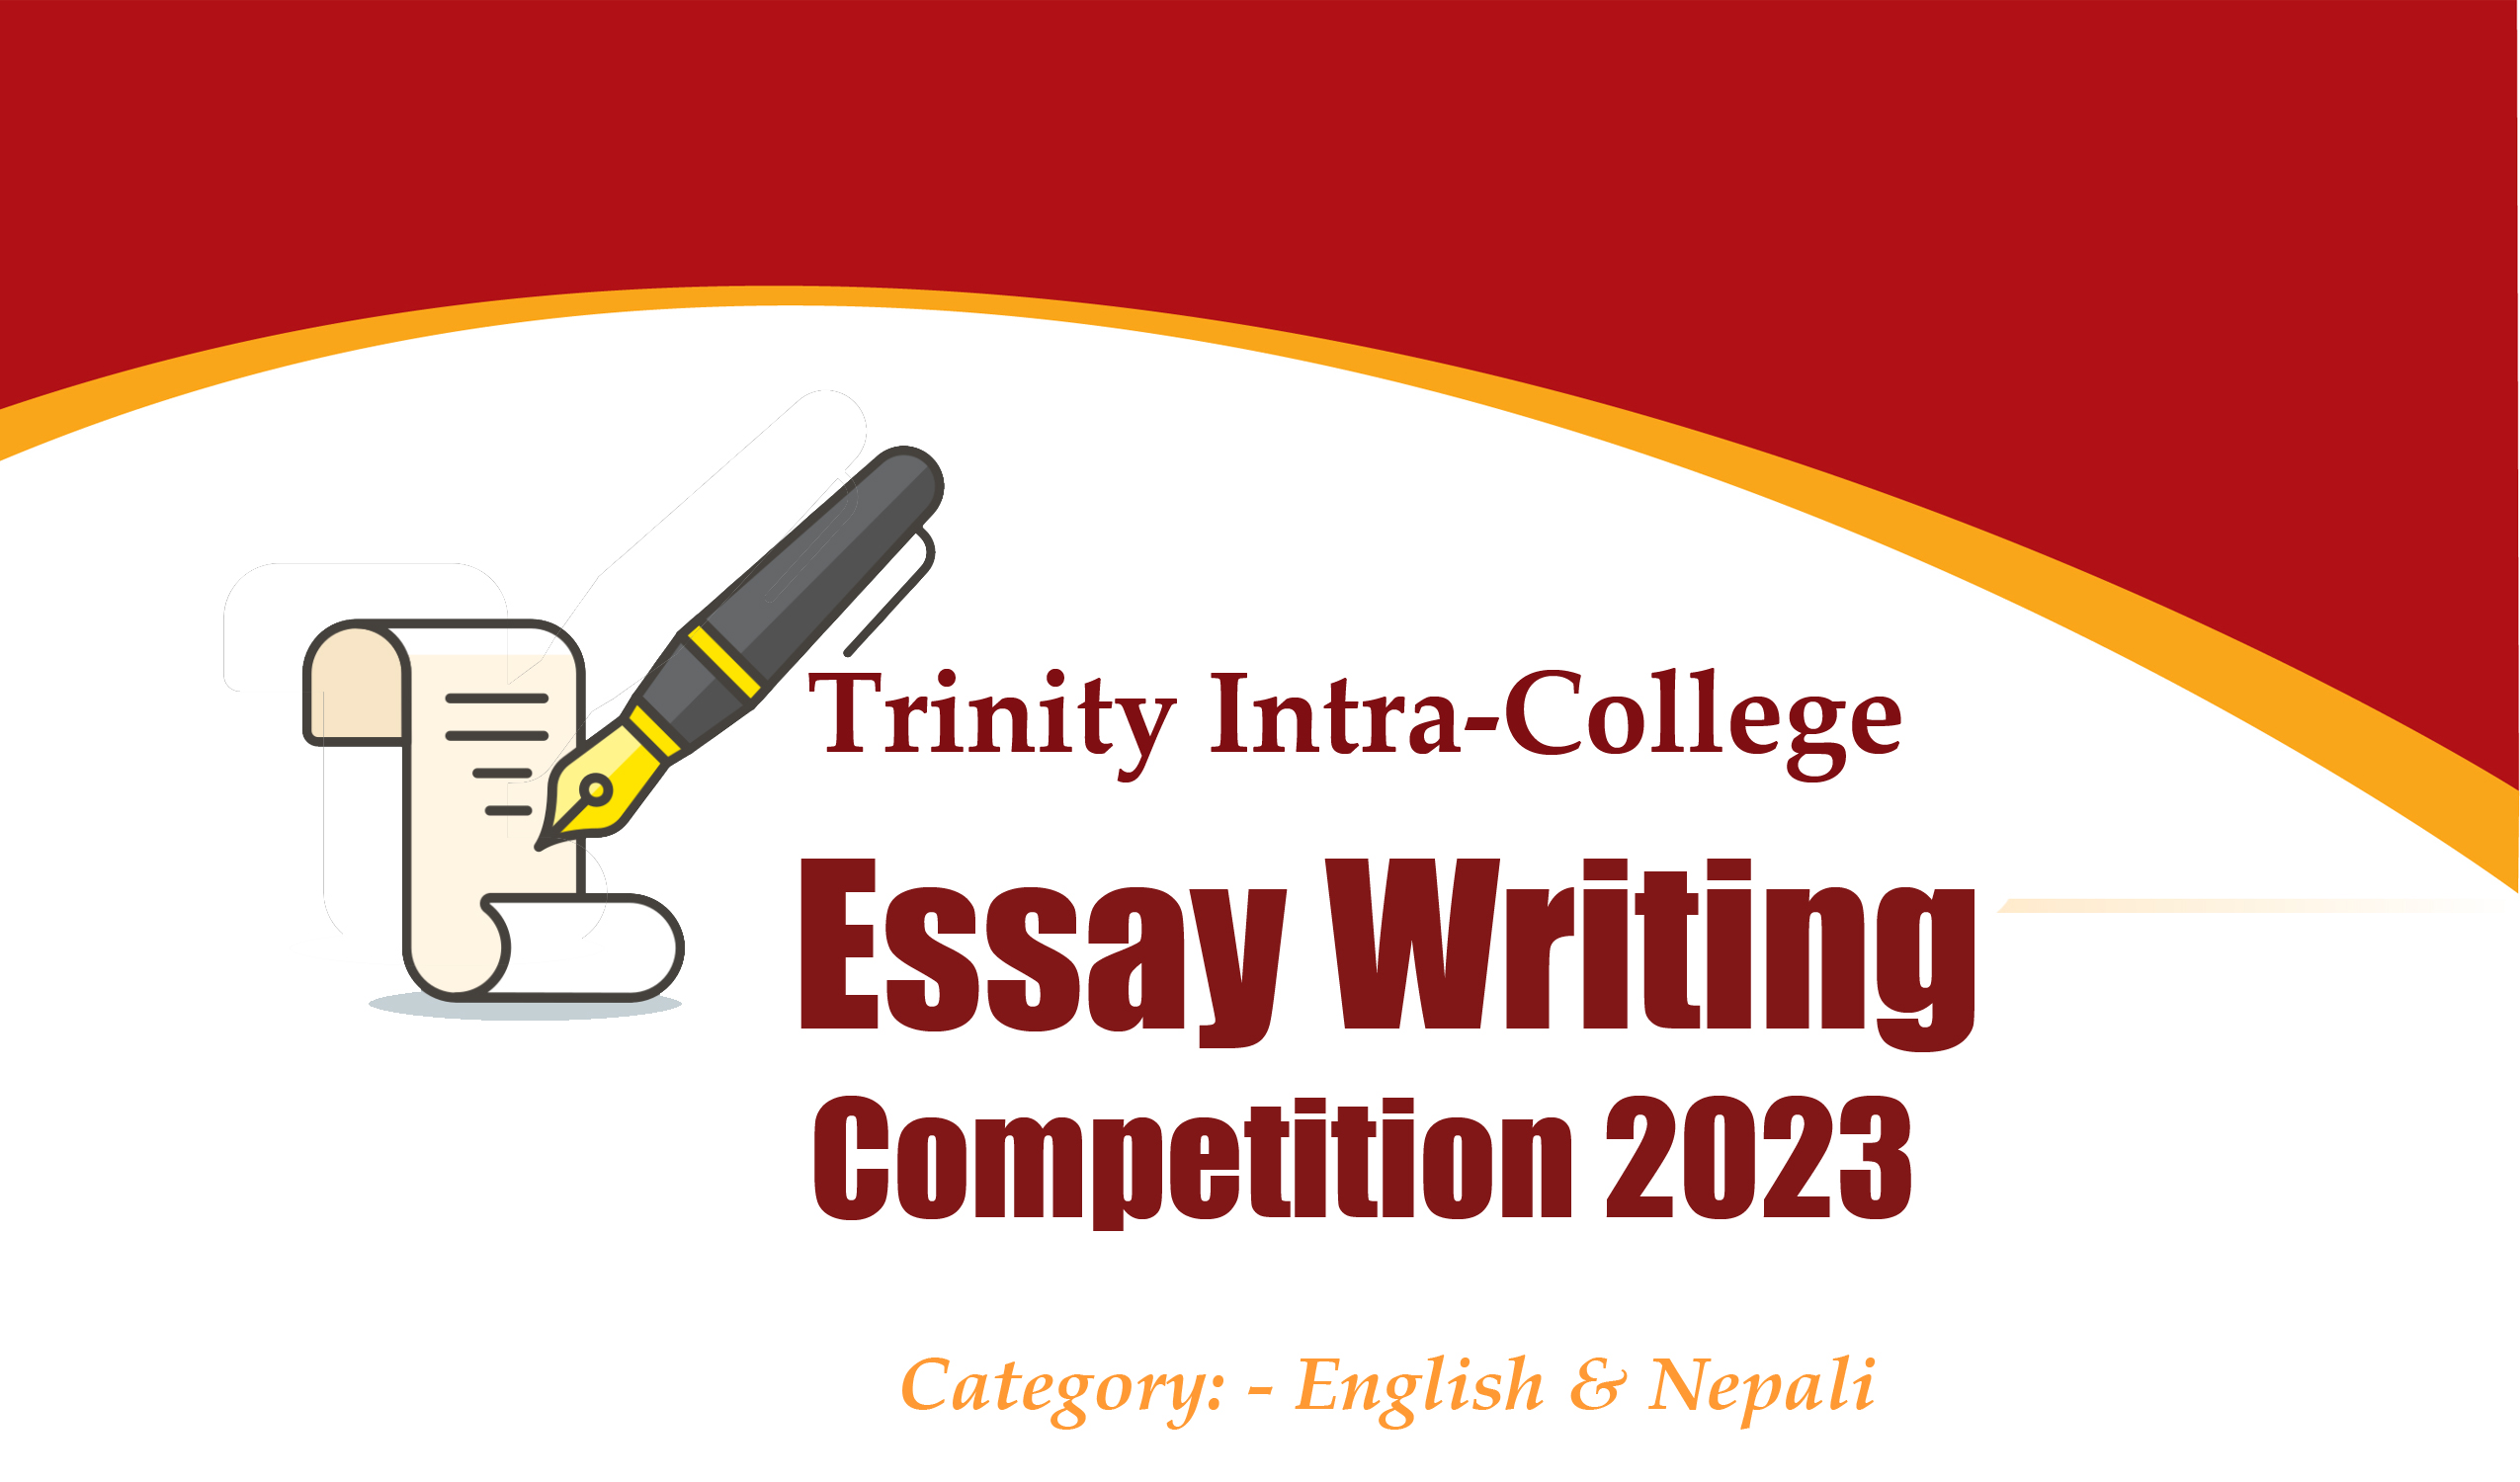 16th Intra-College Essay Writing Competition